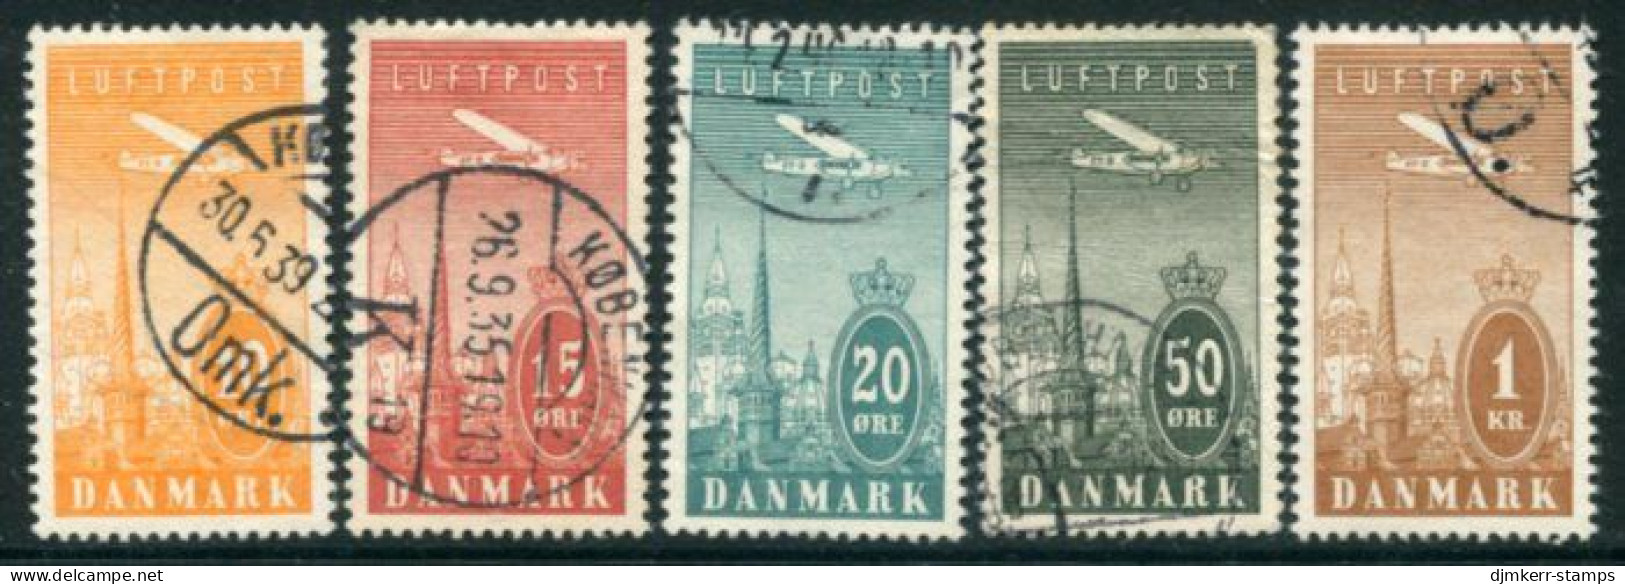 DENMARK 1934 Airmail Set Of 5, Fine Used.  Michel 217-21;  SG 287-91 - Used Stamps